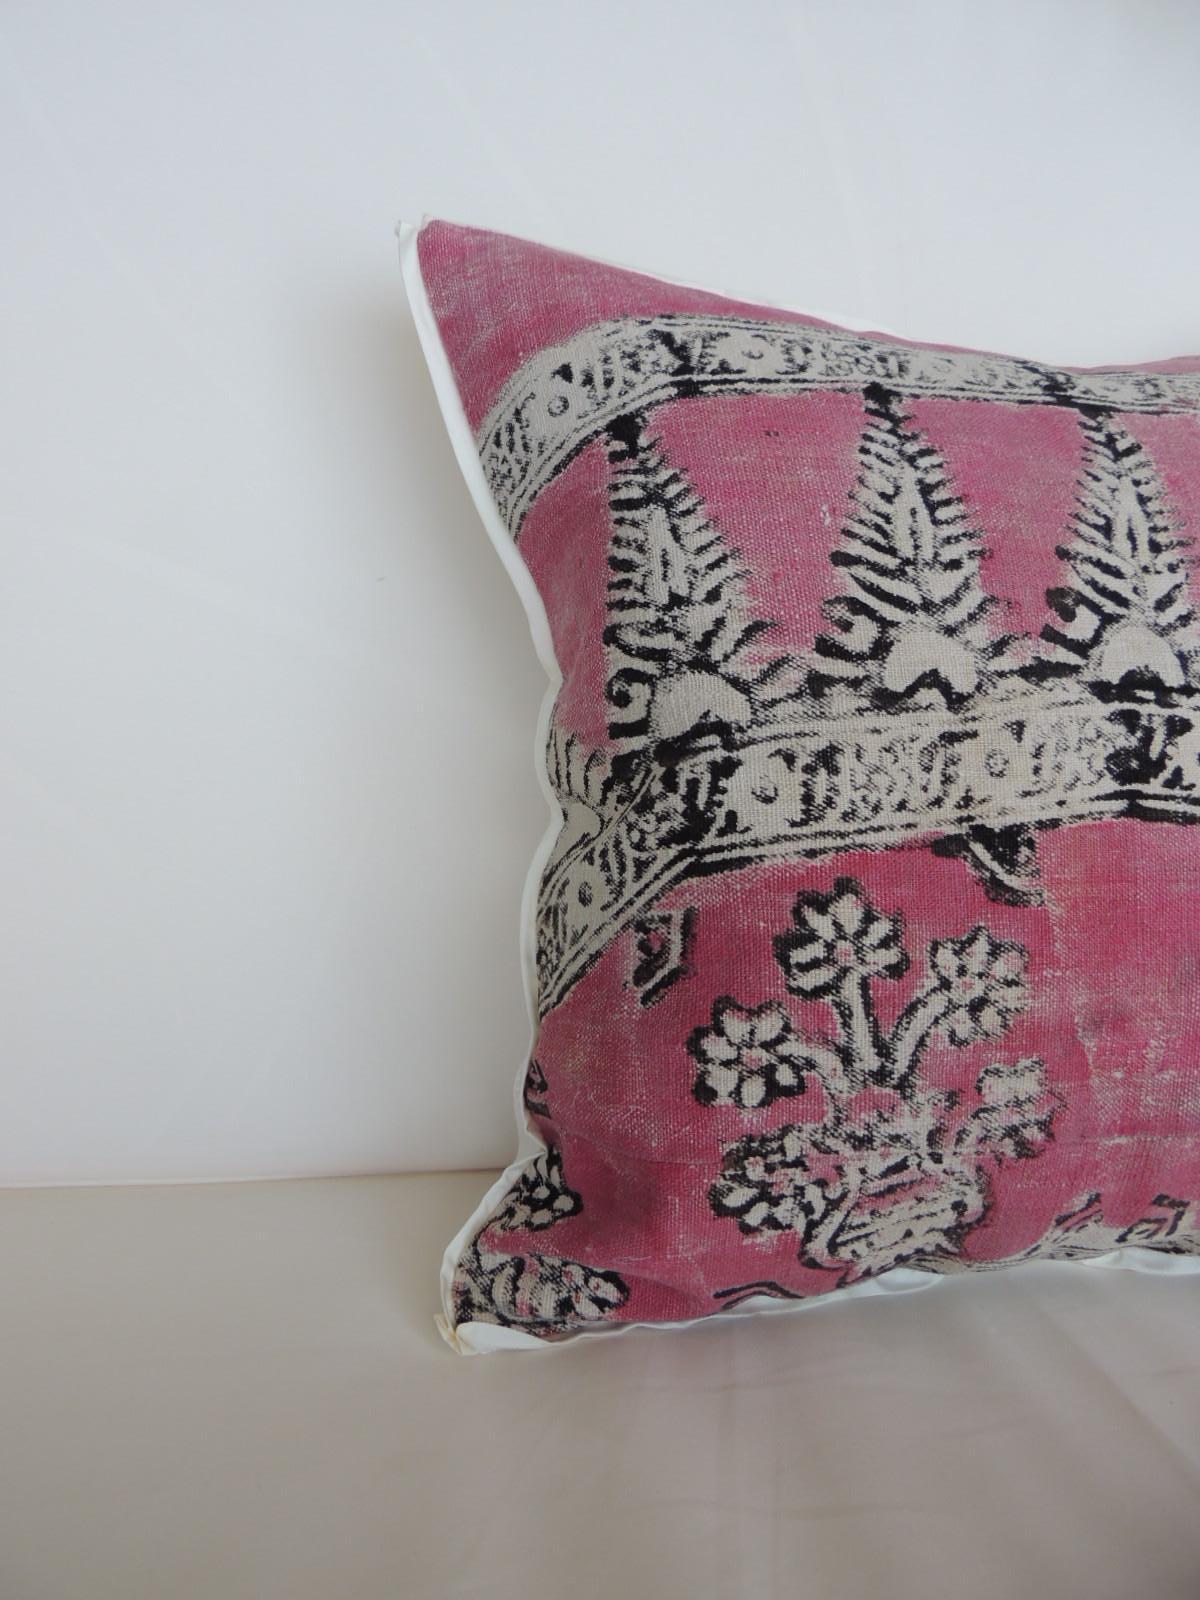 Vintage pink and black hand blocked square decorative pillow.
Pink and black Indian pillow with oyster color linen backing and cream color flat silk trim all around.
Decorative pillow handcrafted and designed in the USA.
Closure by stitch (no